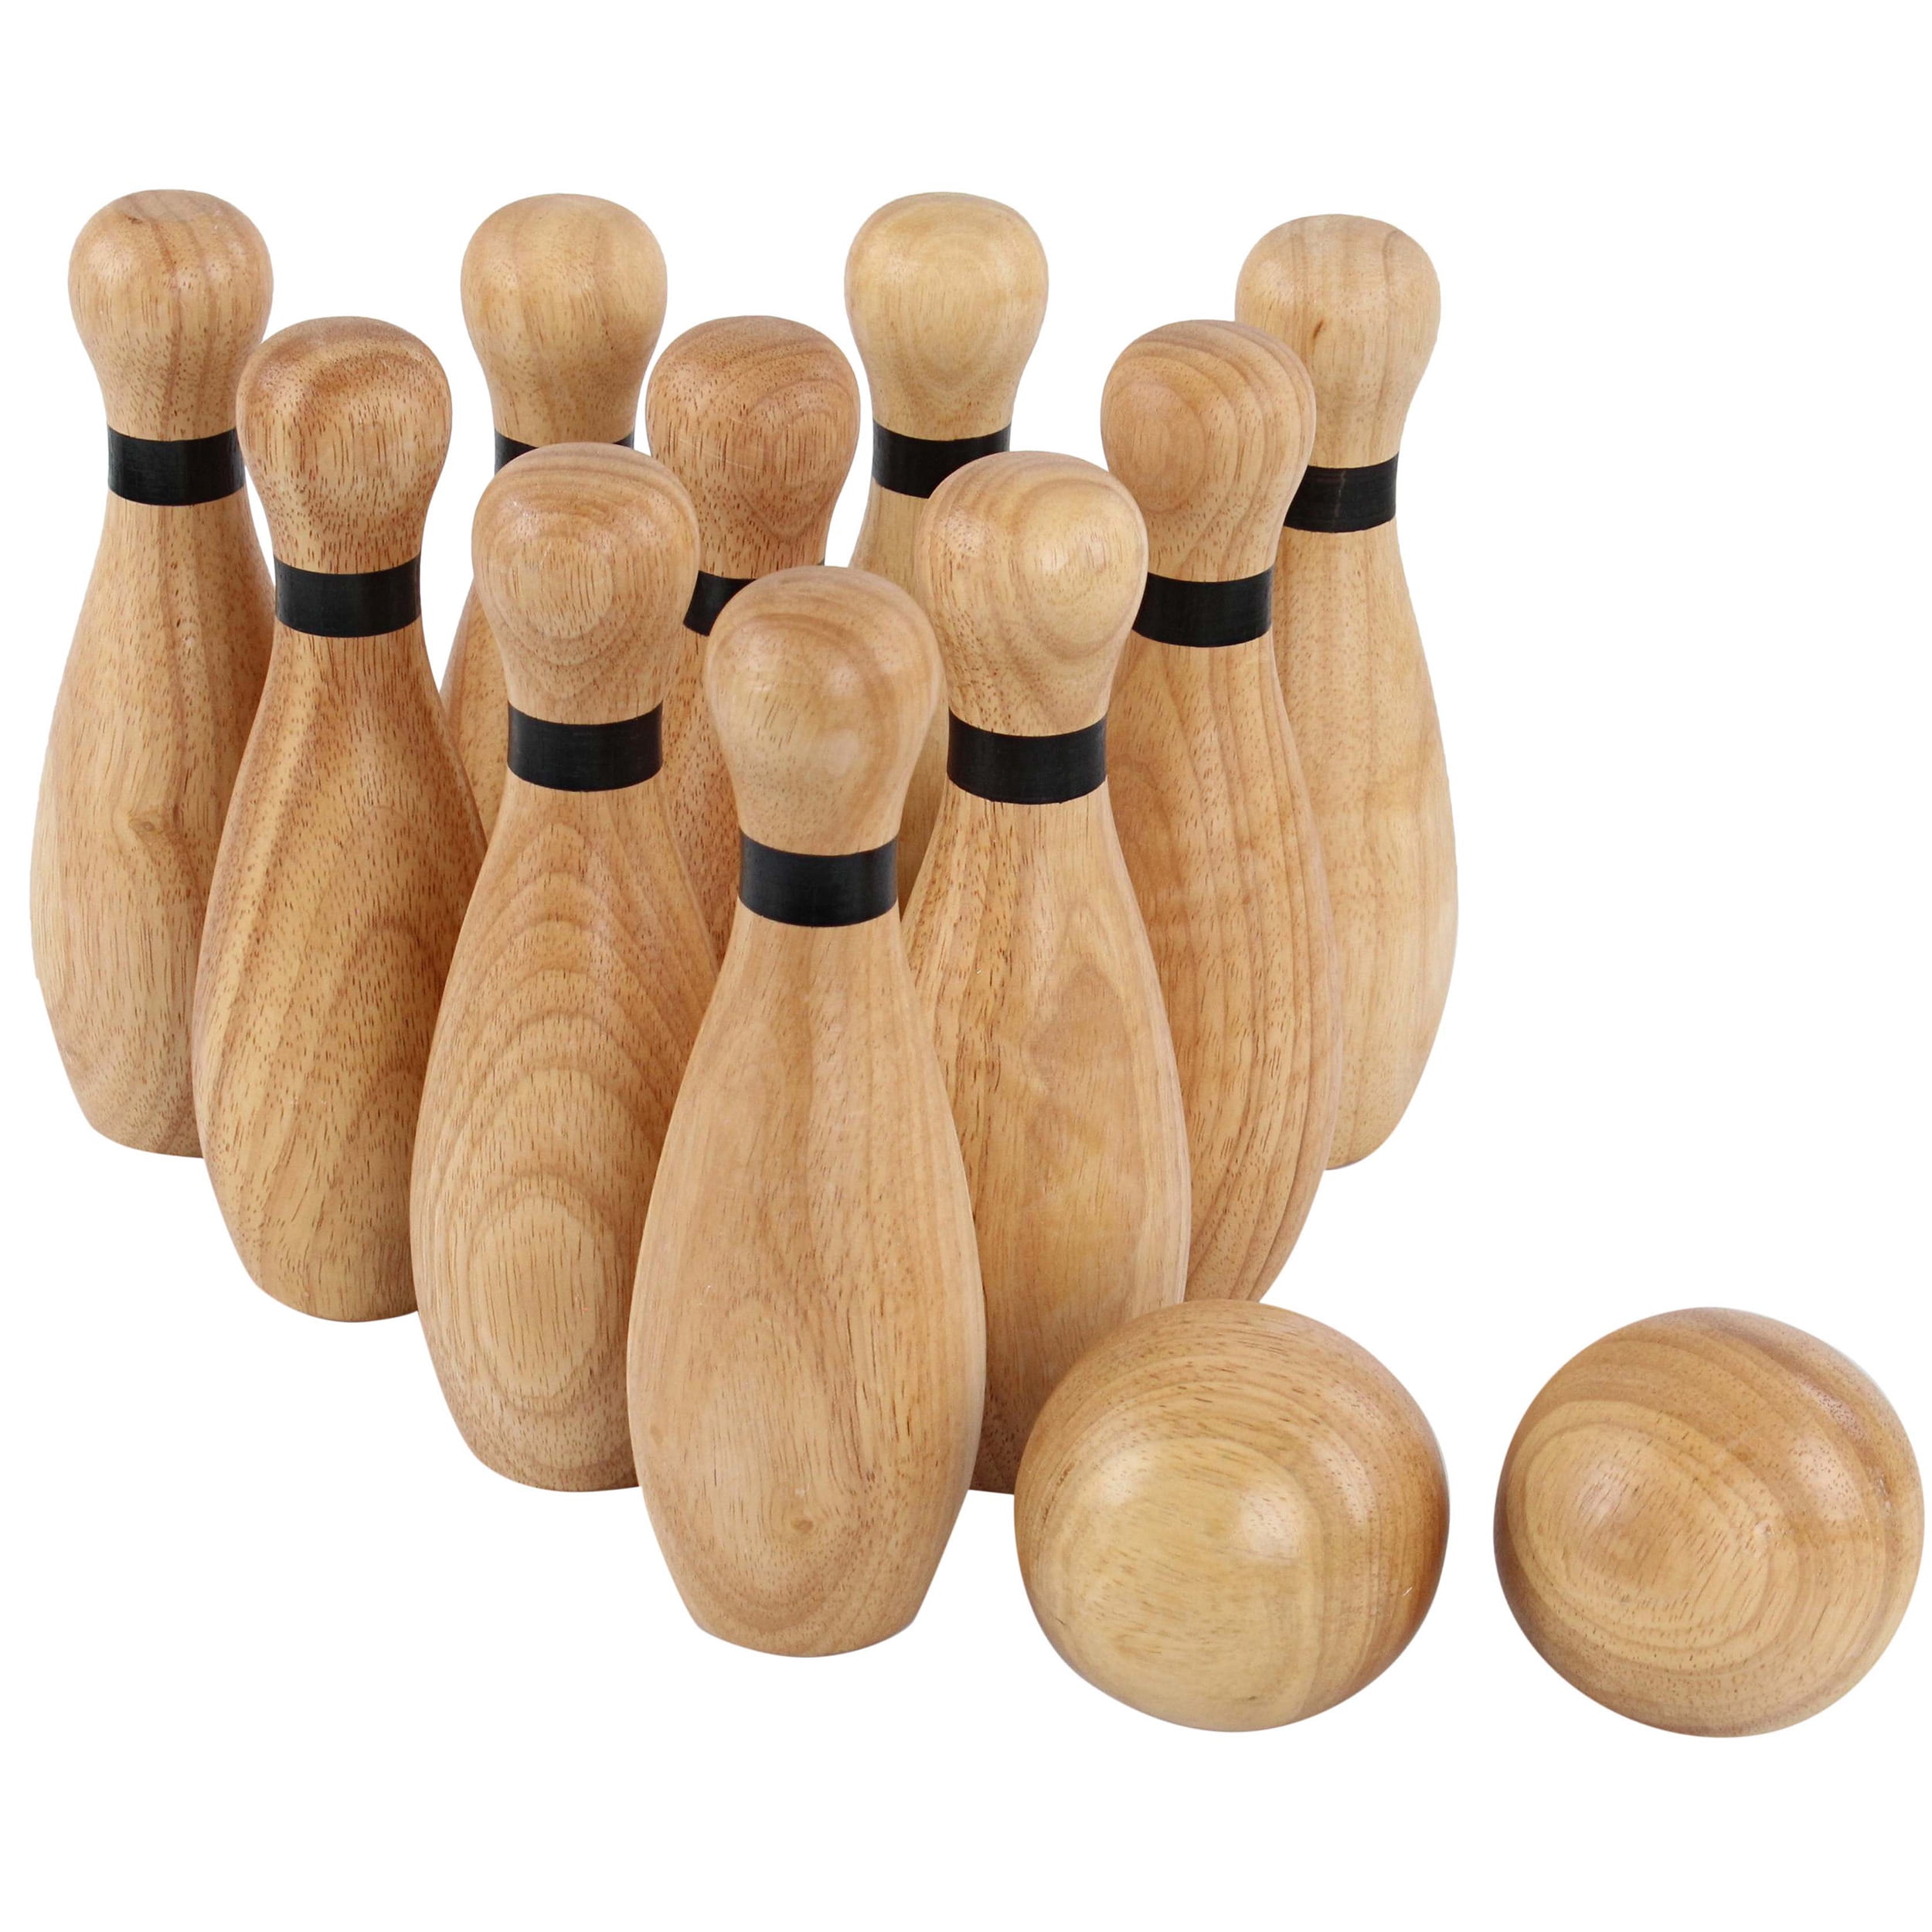 Boley Kids Bowling Set Toddler Bowling Pin and Ball Set Portable Indoor or Outdoor Bowling Game 12 Piece Lawn Bowling Games Set